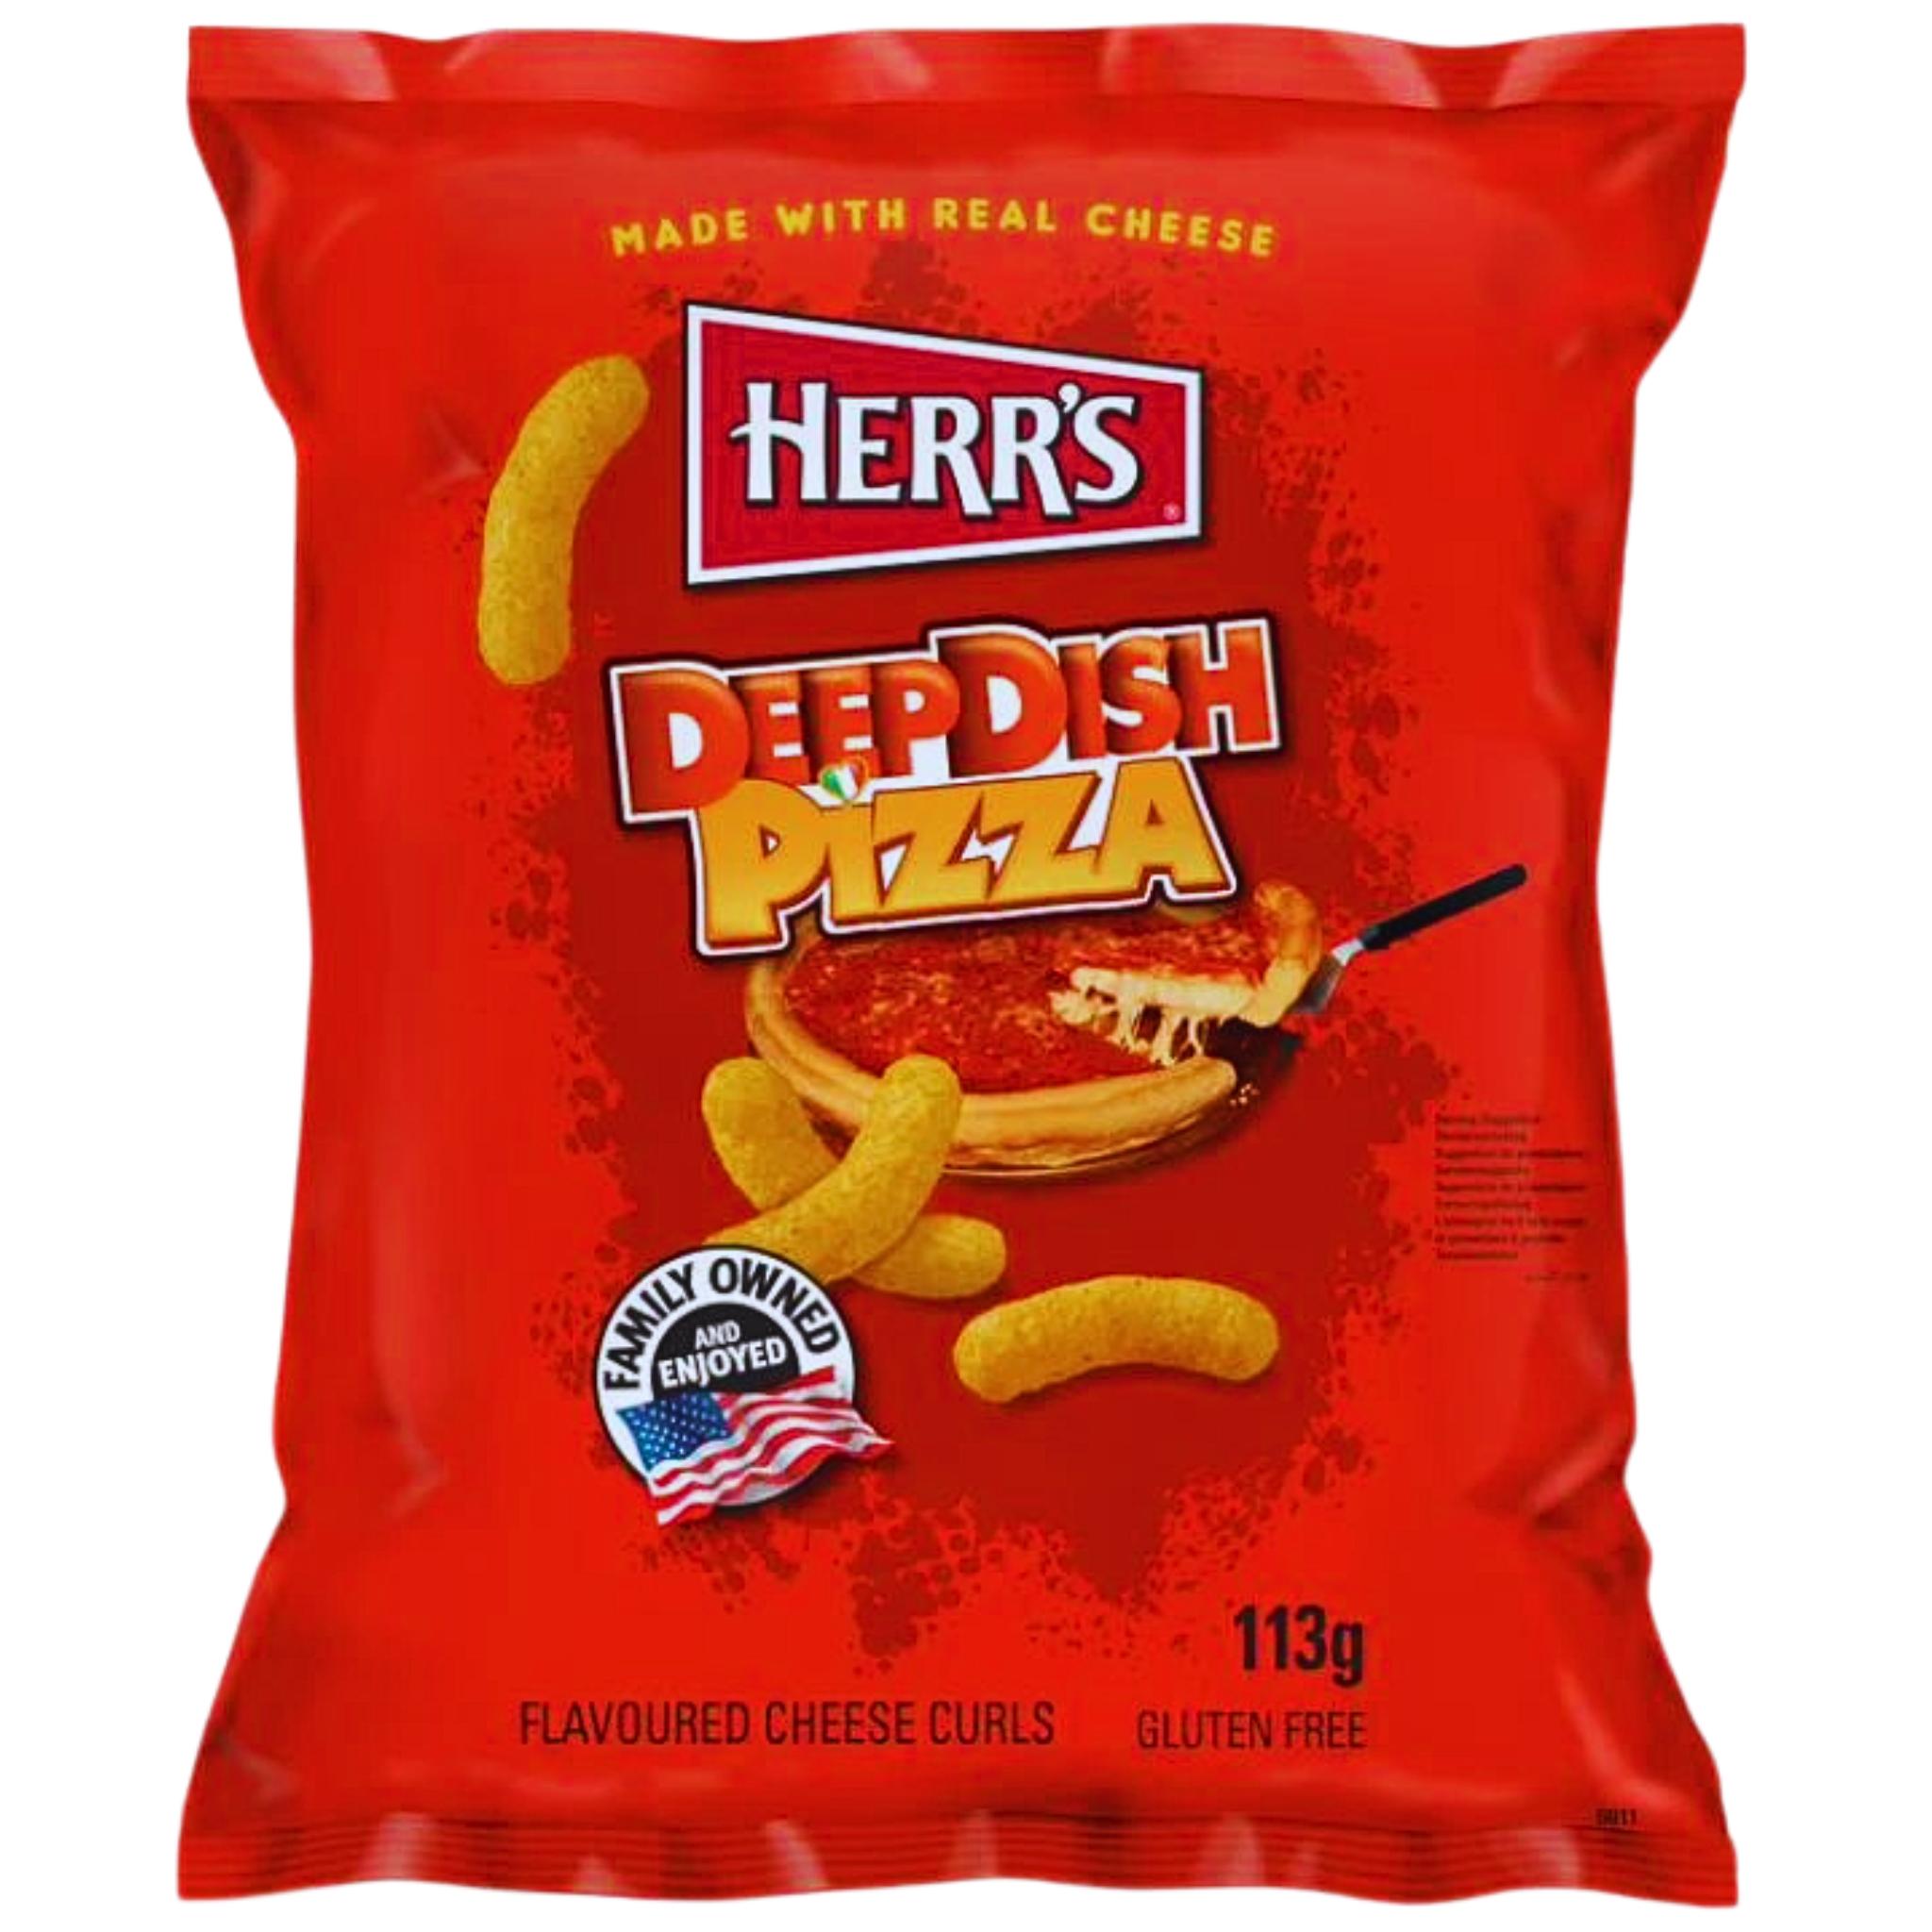 Herr's Deep Dish Pizza Flavored Cheese Curls - 113g (USA)